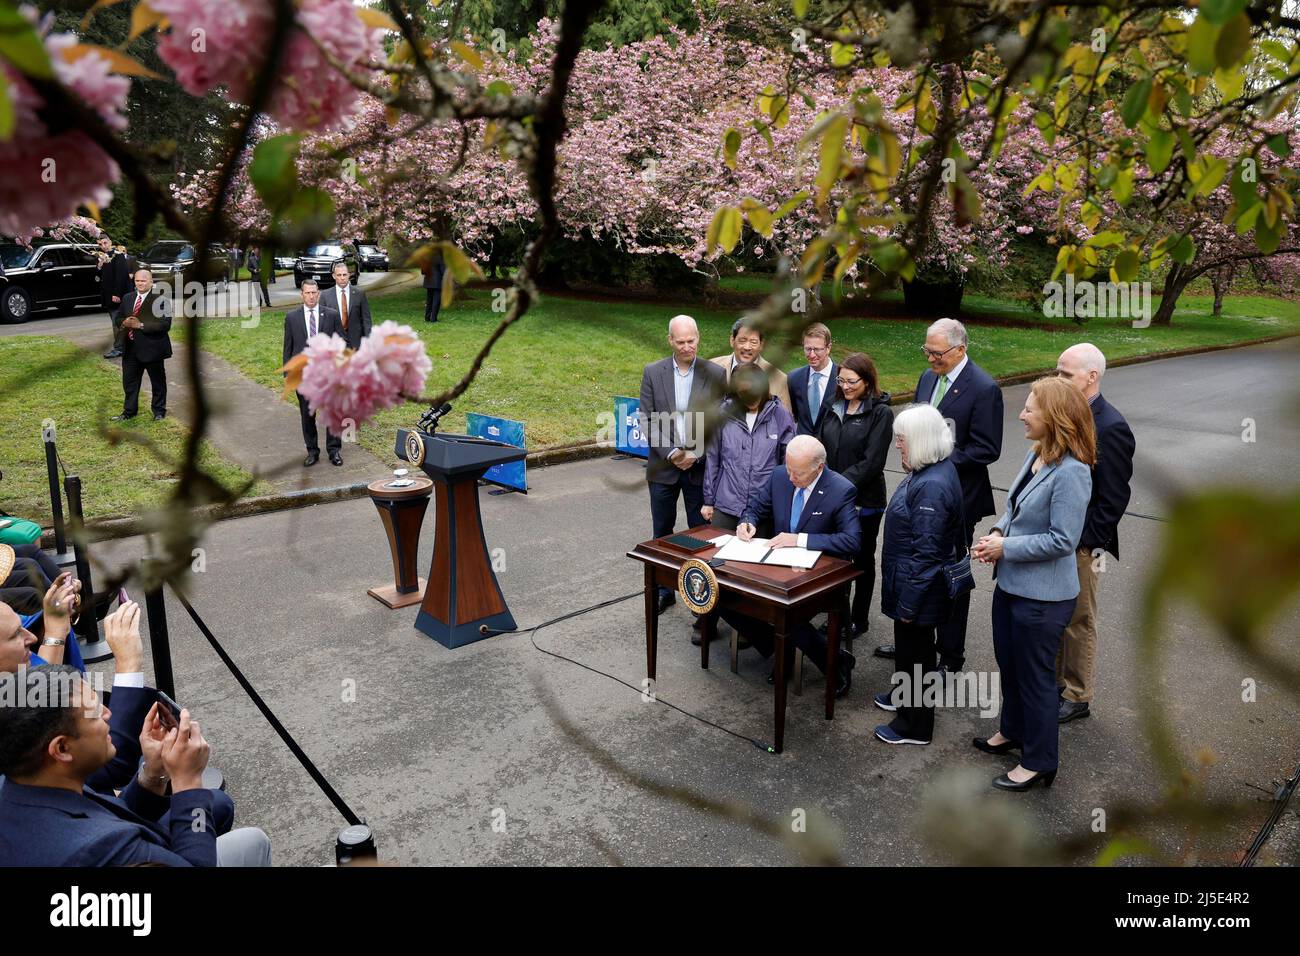 U.S. President Joe Biden signs an executive order intended as an initiative to conserve old-growth forests in federal lands, after delivering remarks about climate change and protecting national forests on Earth Day, at Seward Park in Seattle, Washington, U.S. April 22, 2022. REUTERS/Jonathan Ernst Stock Photo